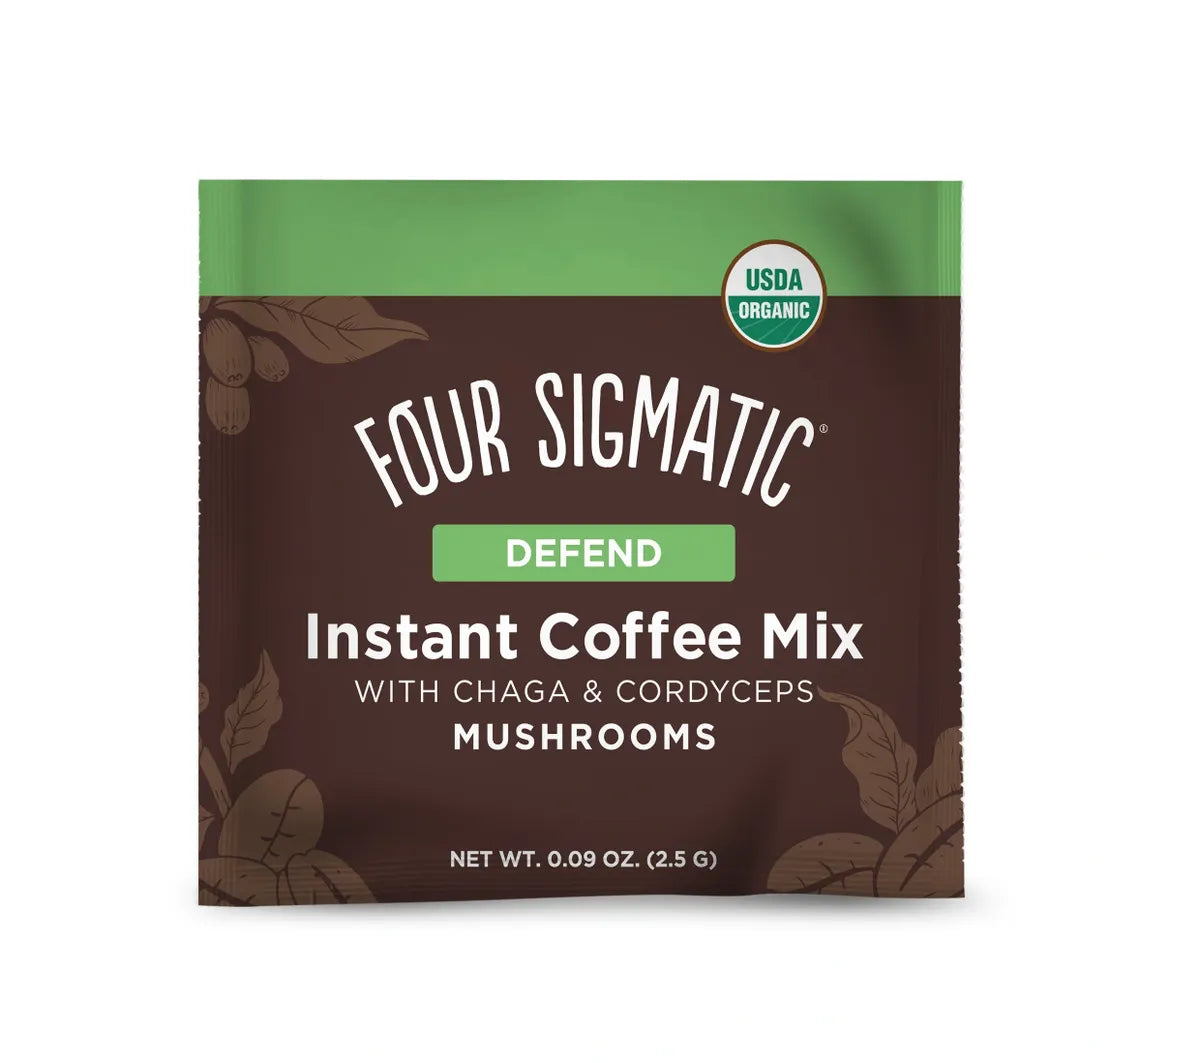 Instant Coffee Mix With Chaga and Cordyceps Mushrooms - DEFEND